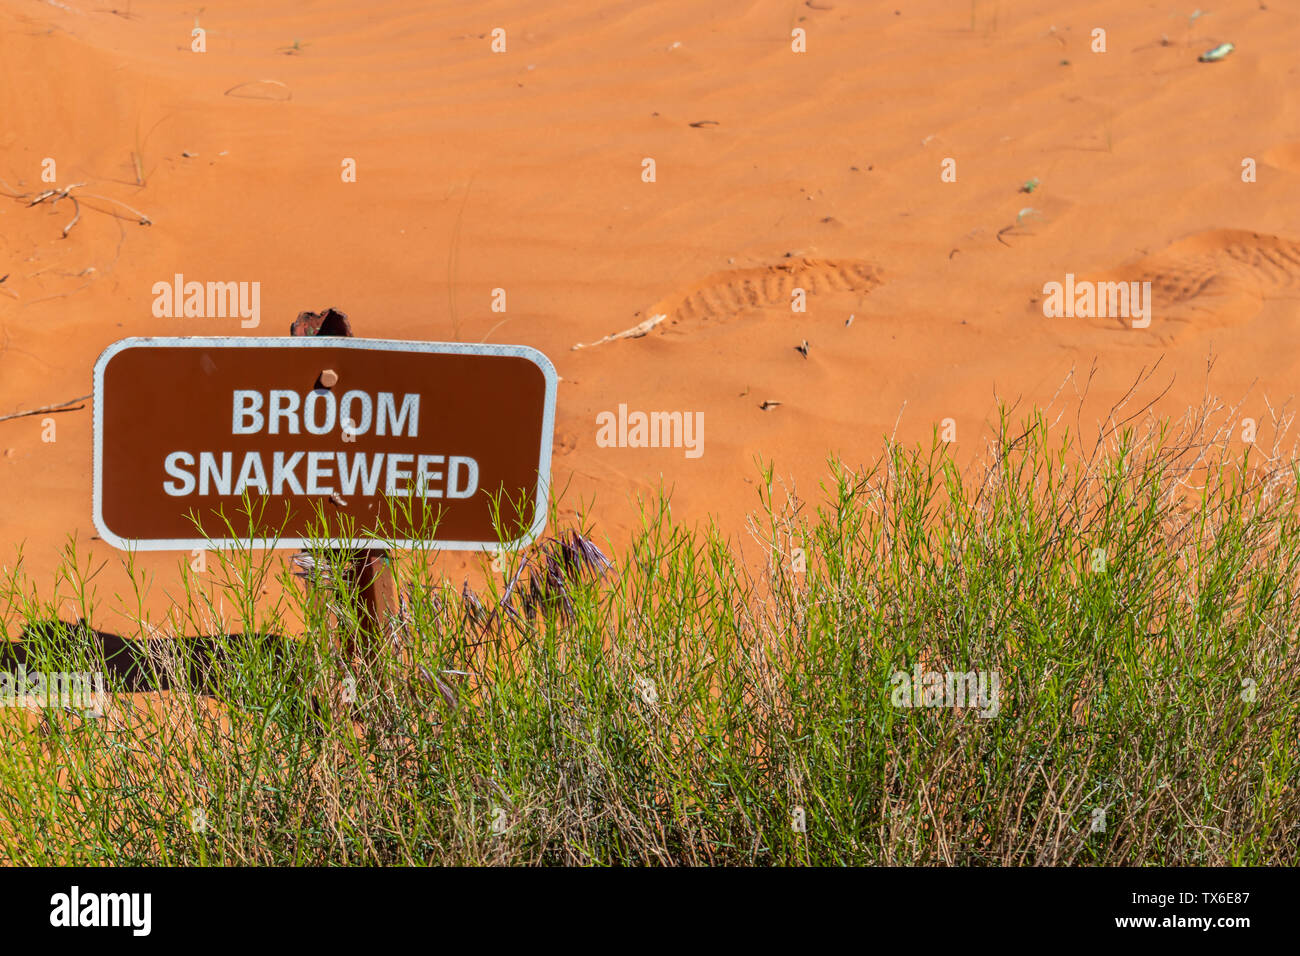 Desert broom snakeweed. Plant and sign against blur red sand background. Trail path signage Monument Valley Navajo Tribal Park, USA Stock Photo